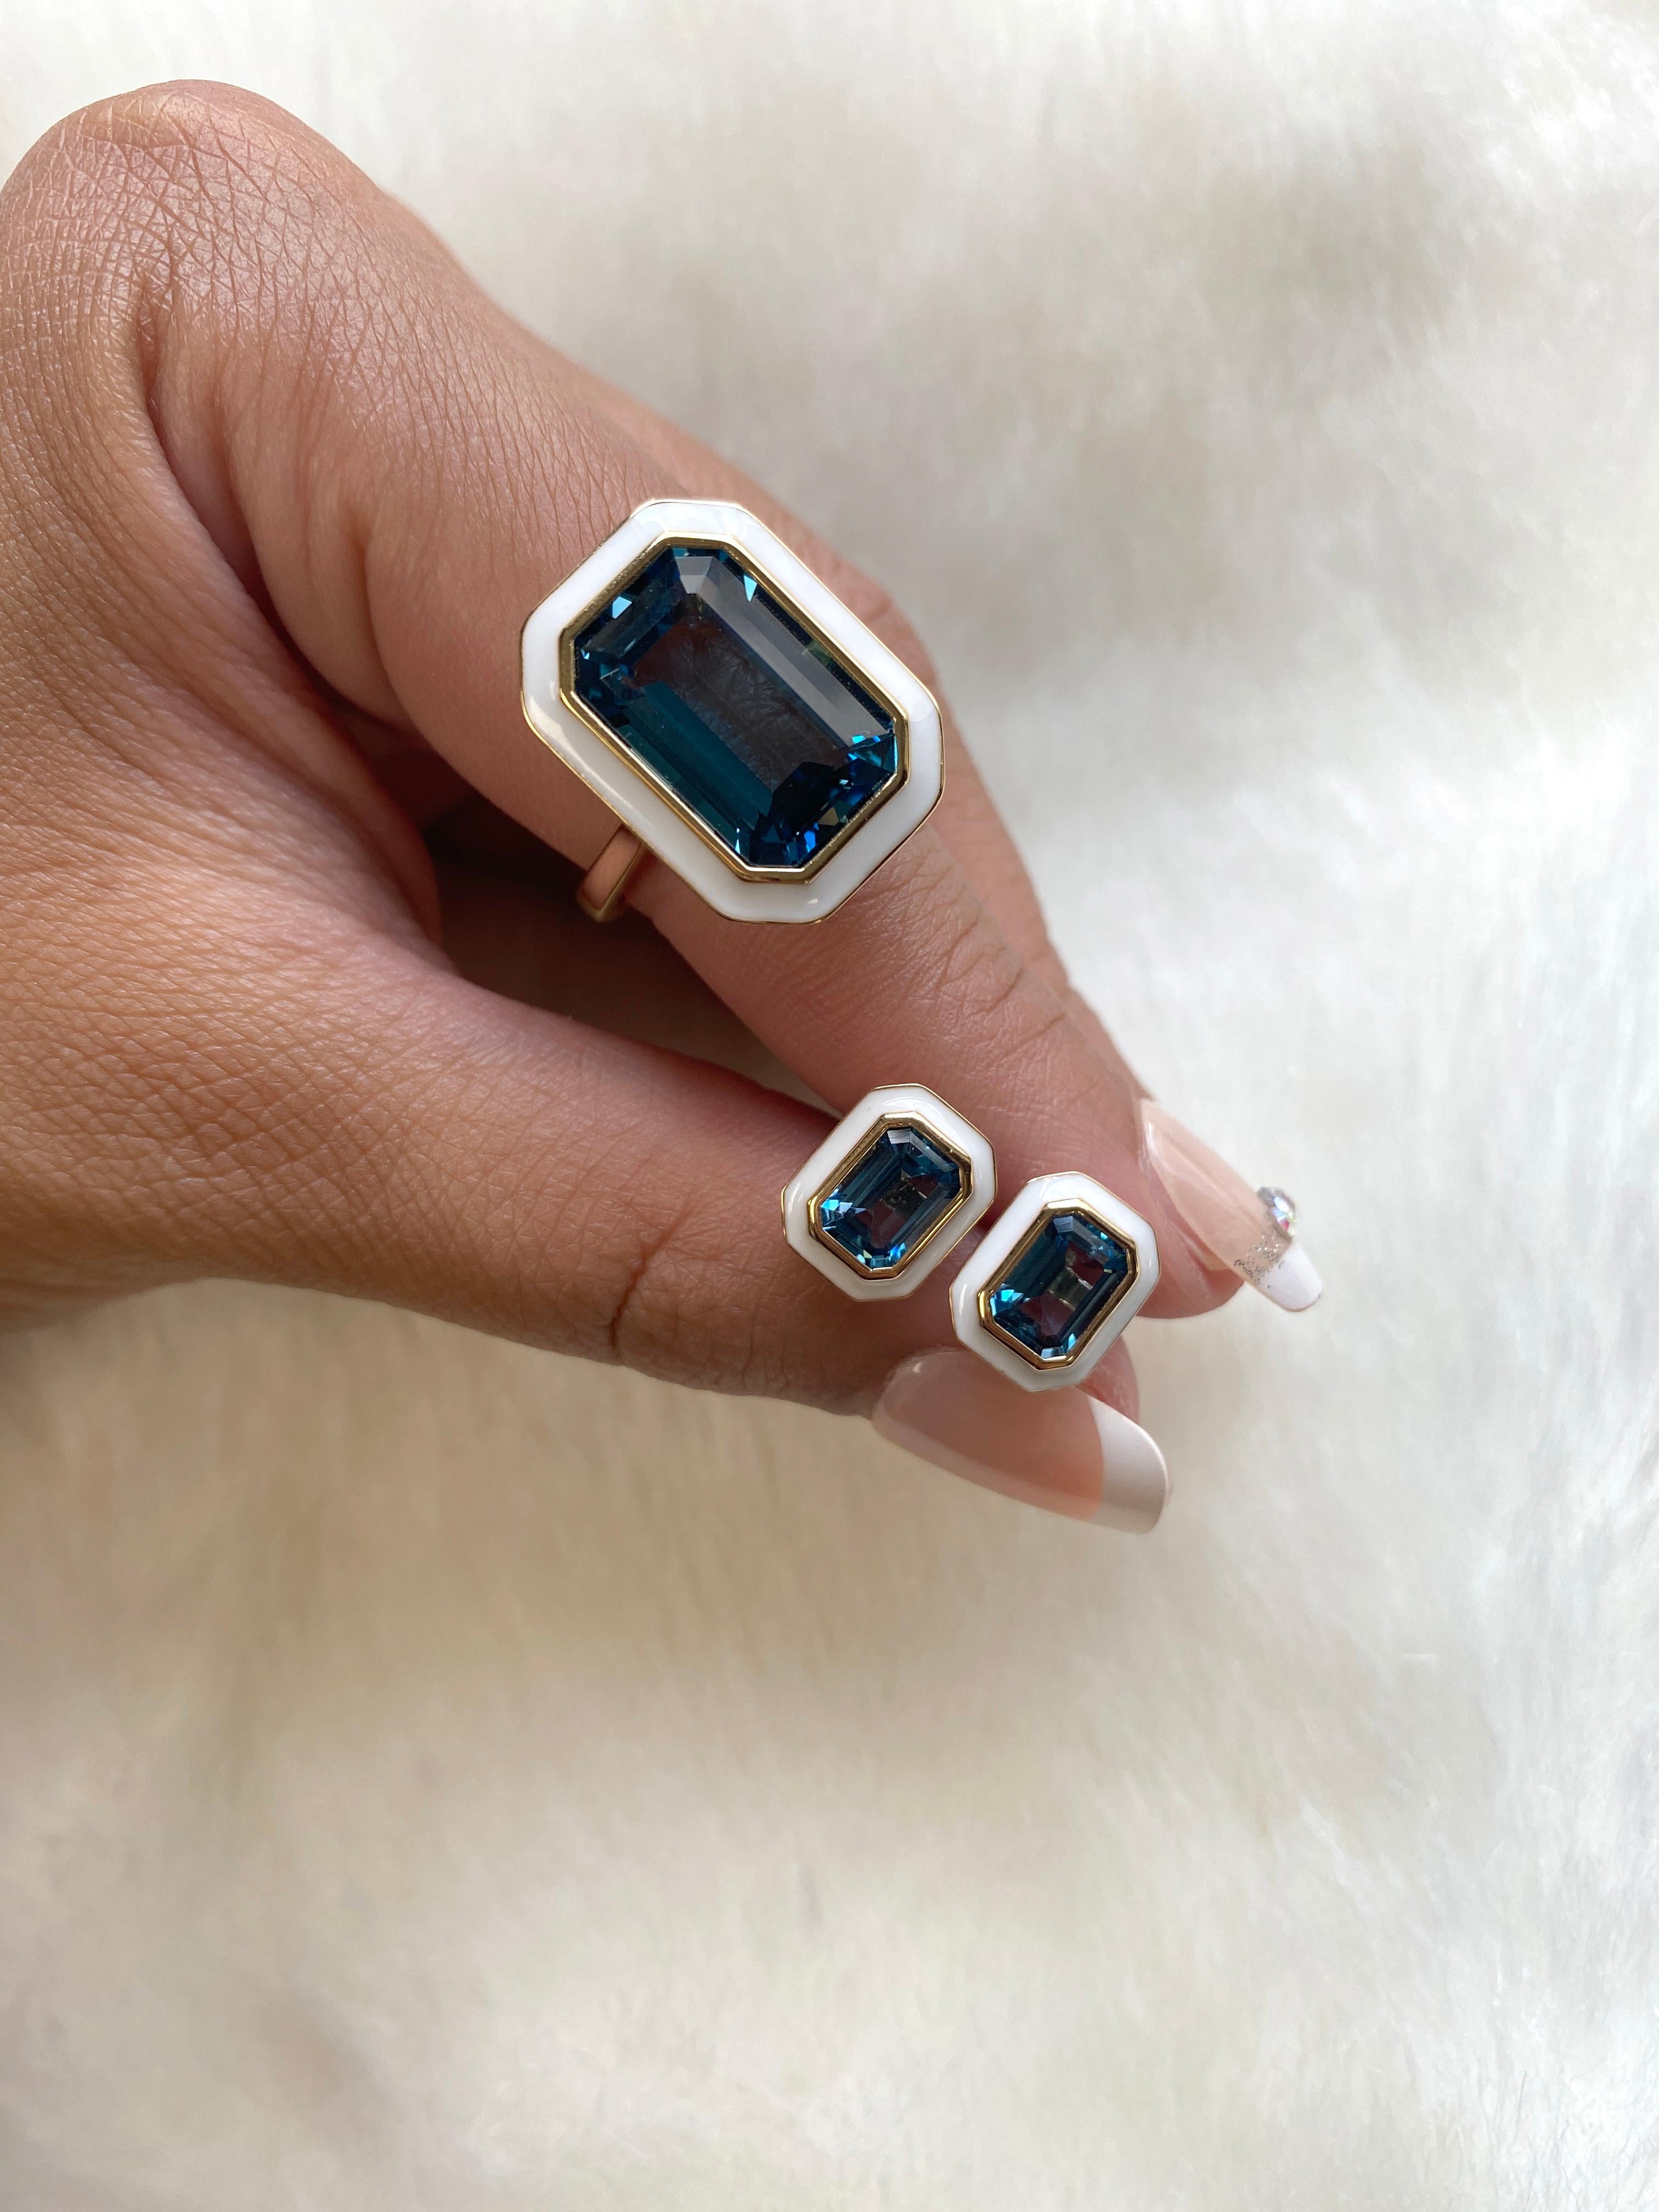 This is a unique combination of London Blue Topaz and White enamel. If you want to make a statement this is the perfect ring to do it!

A 10 x 15 mm London Blue Topaz Emerald cut ring in a bezel setting, with White enamel in the borders.

Gemstone: